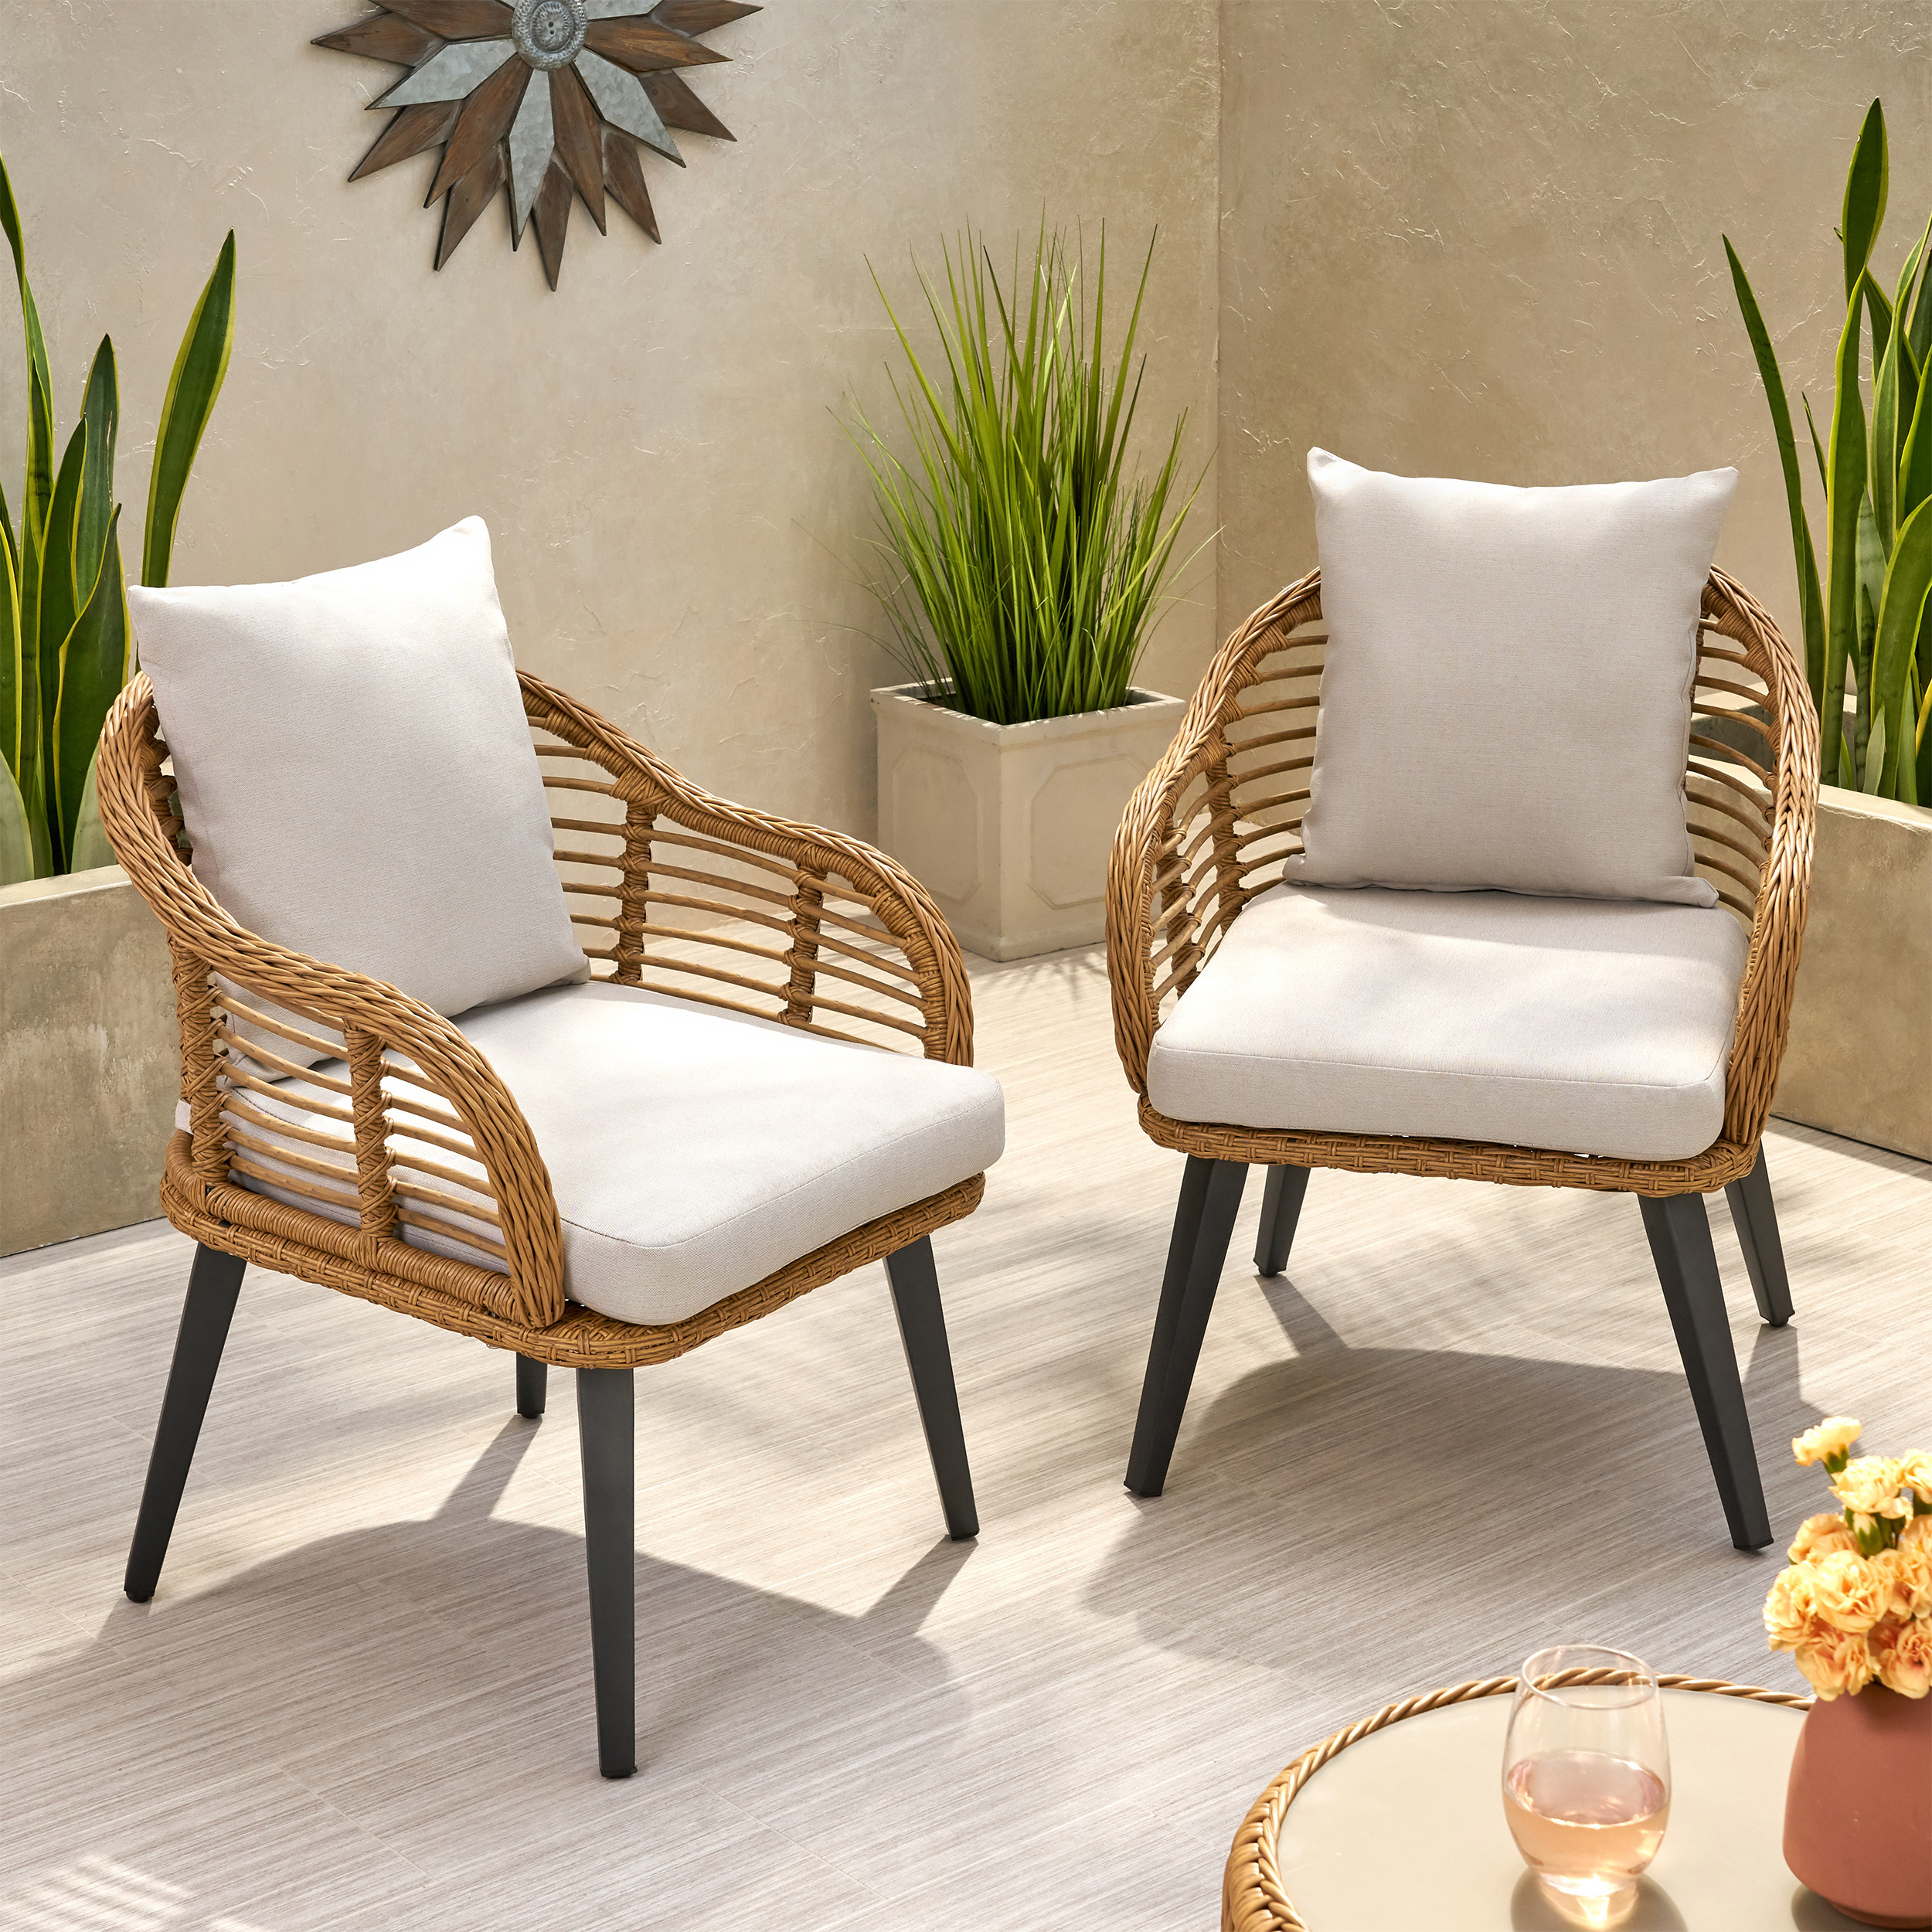 Madison Outdoor Wicker Club Chairs With Cushions (Set Of 2) - Light Brown, Black, Beige